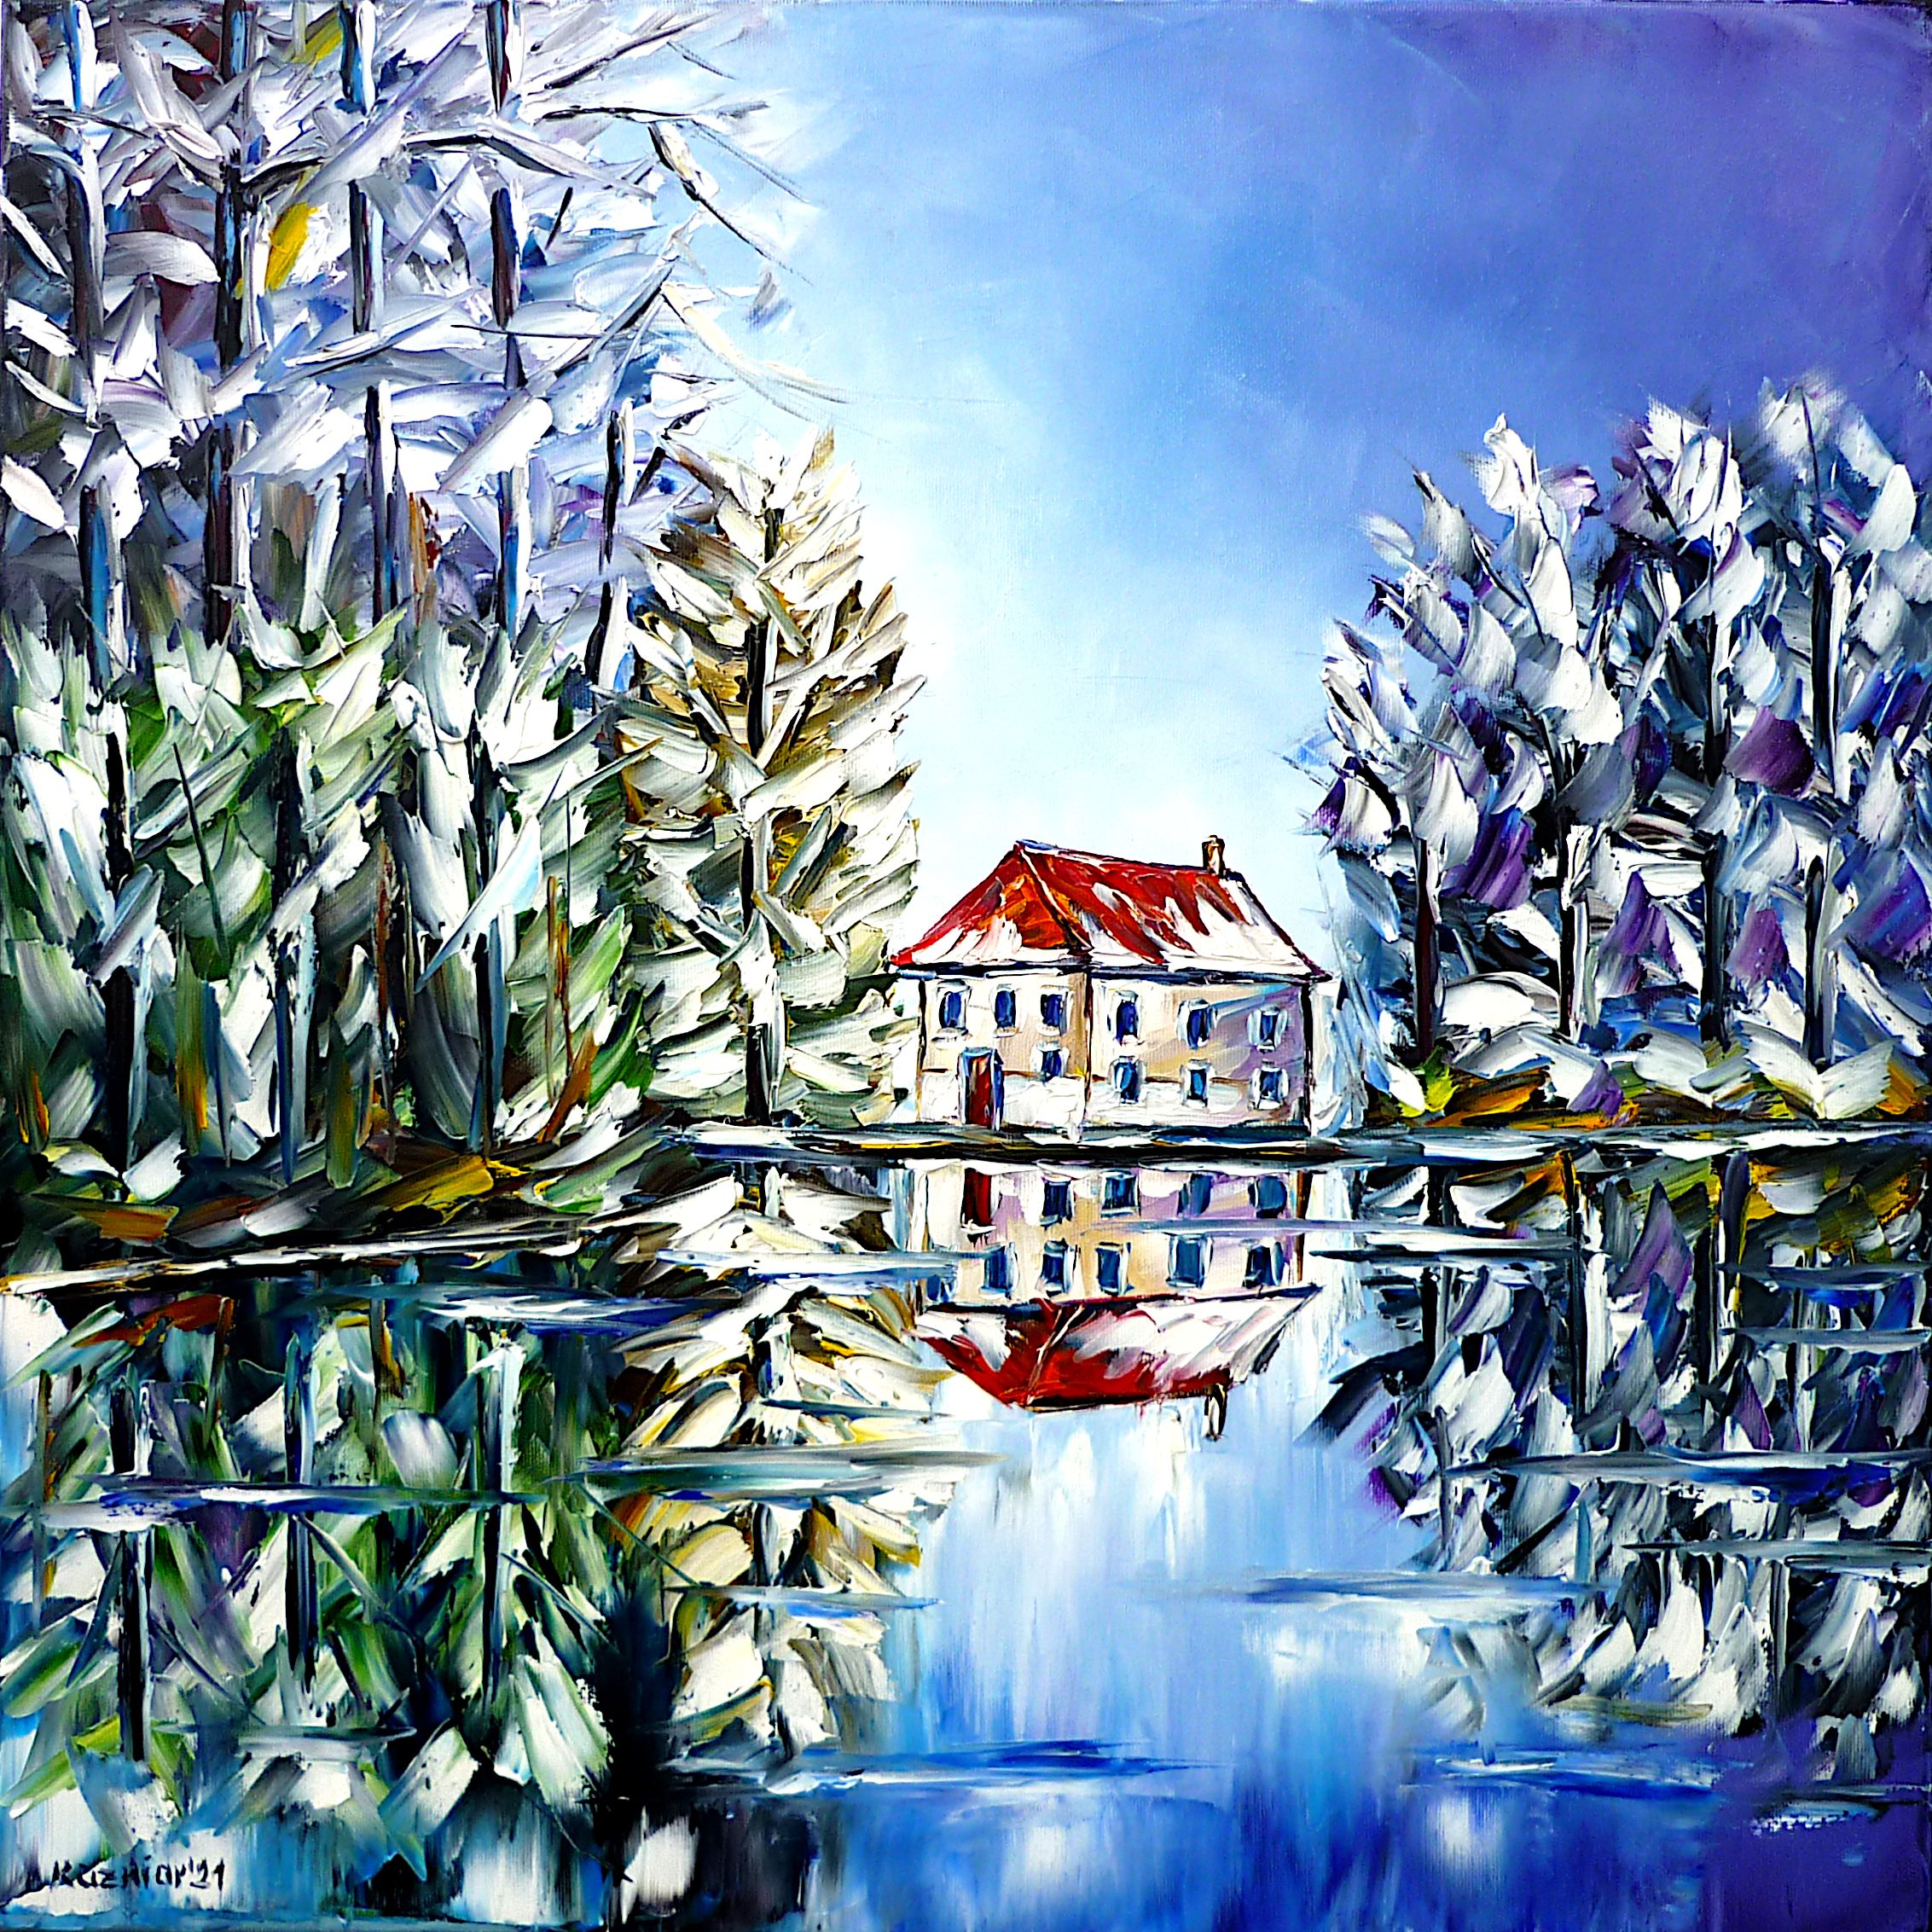 lakescape,lake in winter,red roof,dark blue sky,winter lake,water reflections,bright winter day,landscape picture,landscape painting,christmas mood,winter trees,white landscape,winter landscape,sunny winter day,winter and snow,snowy landscape,christmas feelings,winter beauty,winter sky,winter picture,winter painting,snowy trees,white winter,christmas time,winter love,white trees,square format,square picture,square painting,palette knife oil painting,modern art,impressionism,abstract painting,lively colours,colorful painting,bright colors,light reflections,impasto painting,figurative